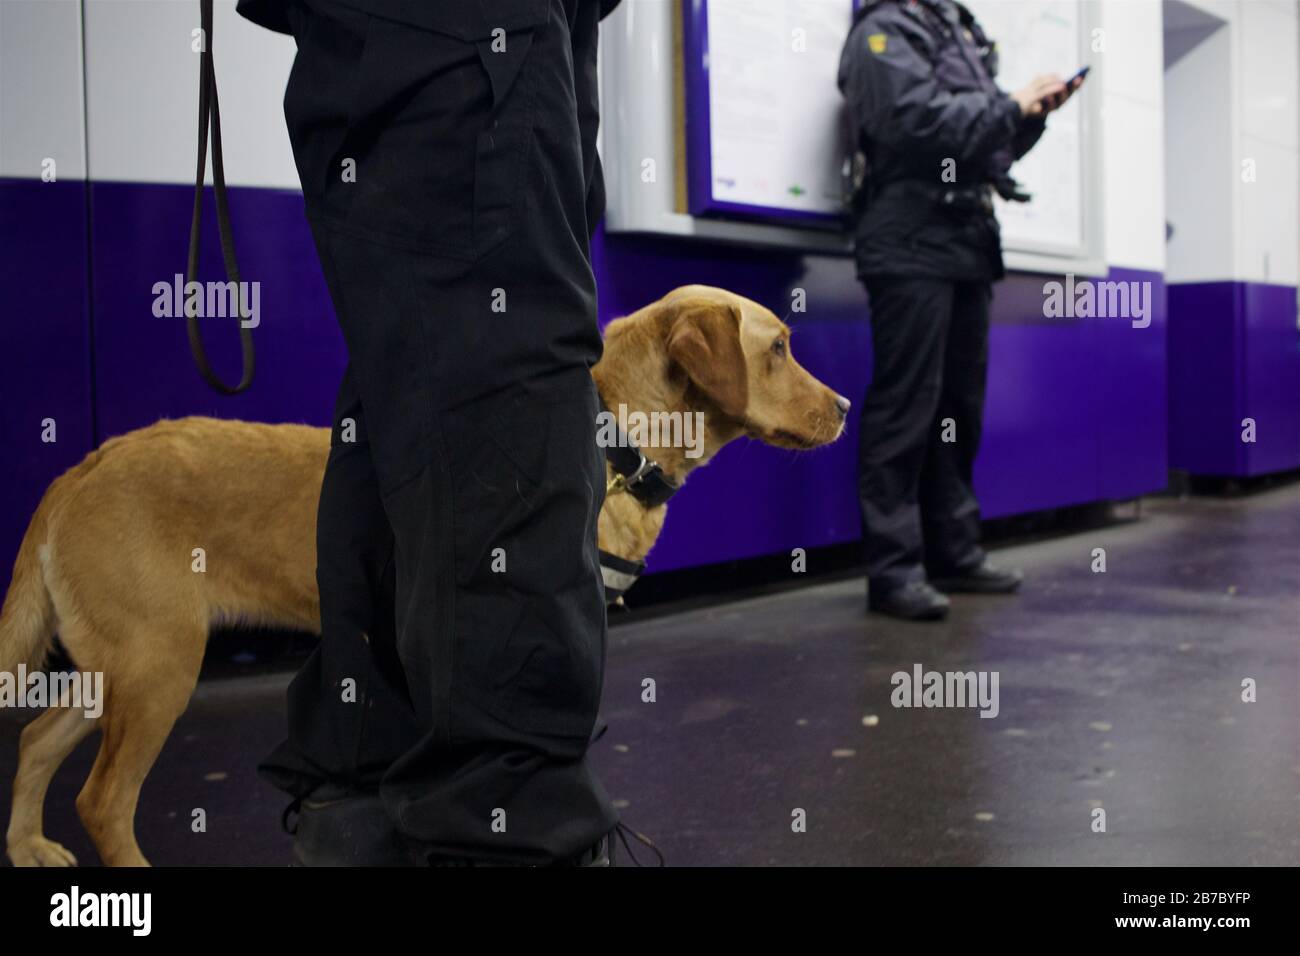 28 February 2020, London, UK British Transport police (BTP) in operation in the UK capital as part of operation, sentinel, tackling drug crime. Stock Photo